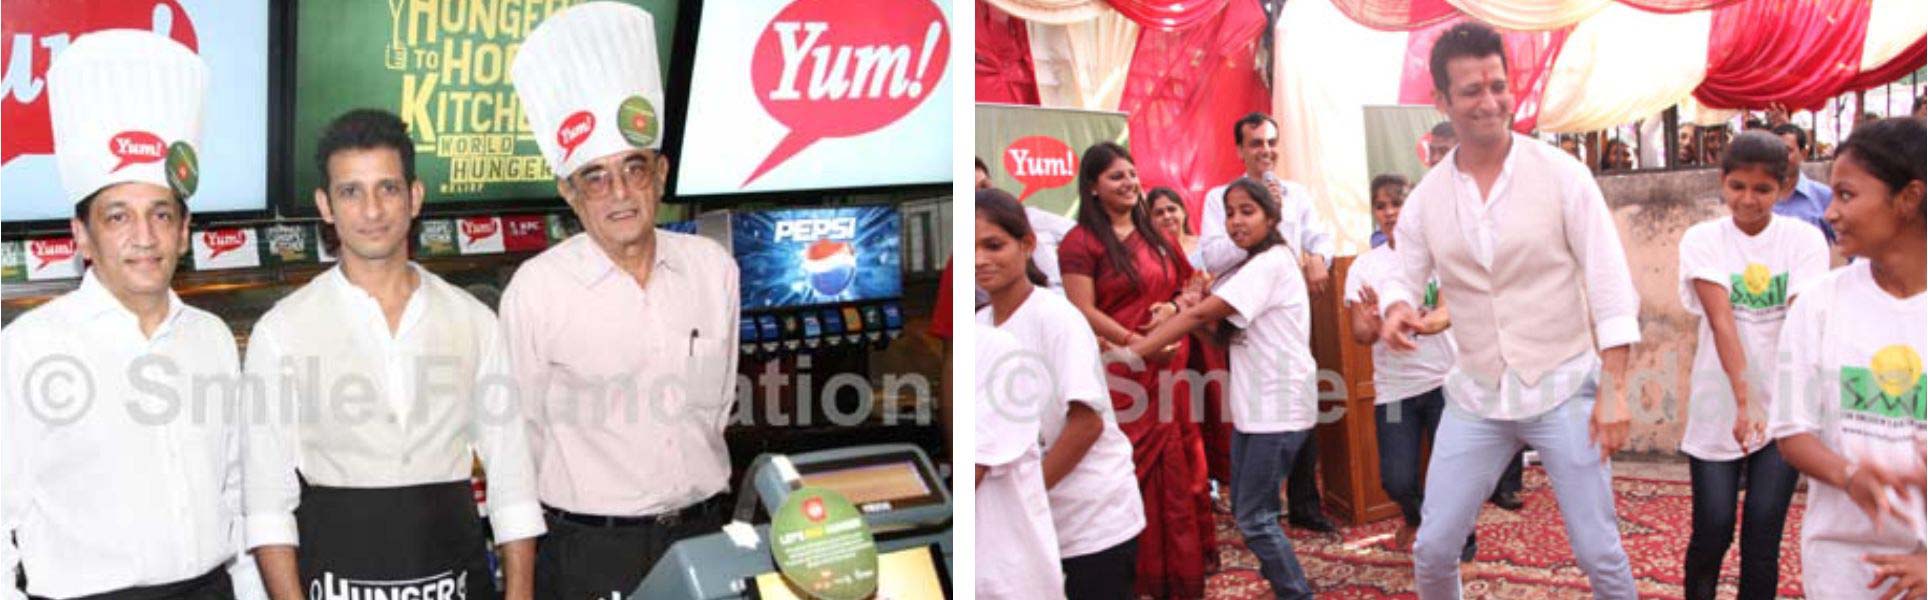 Yum! partners with Smile Foundation to fight hunger